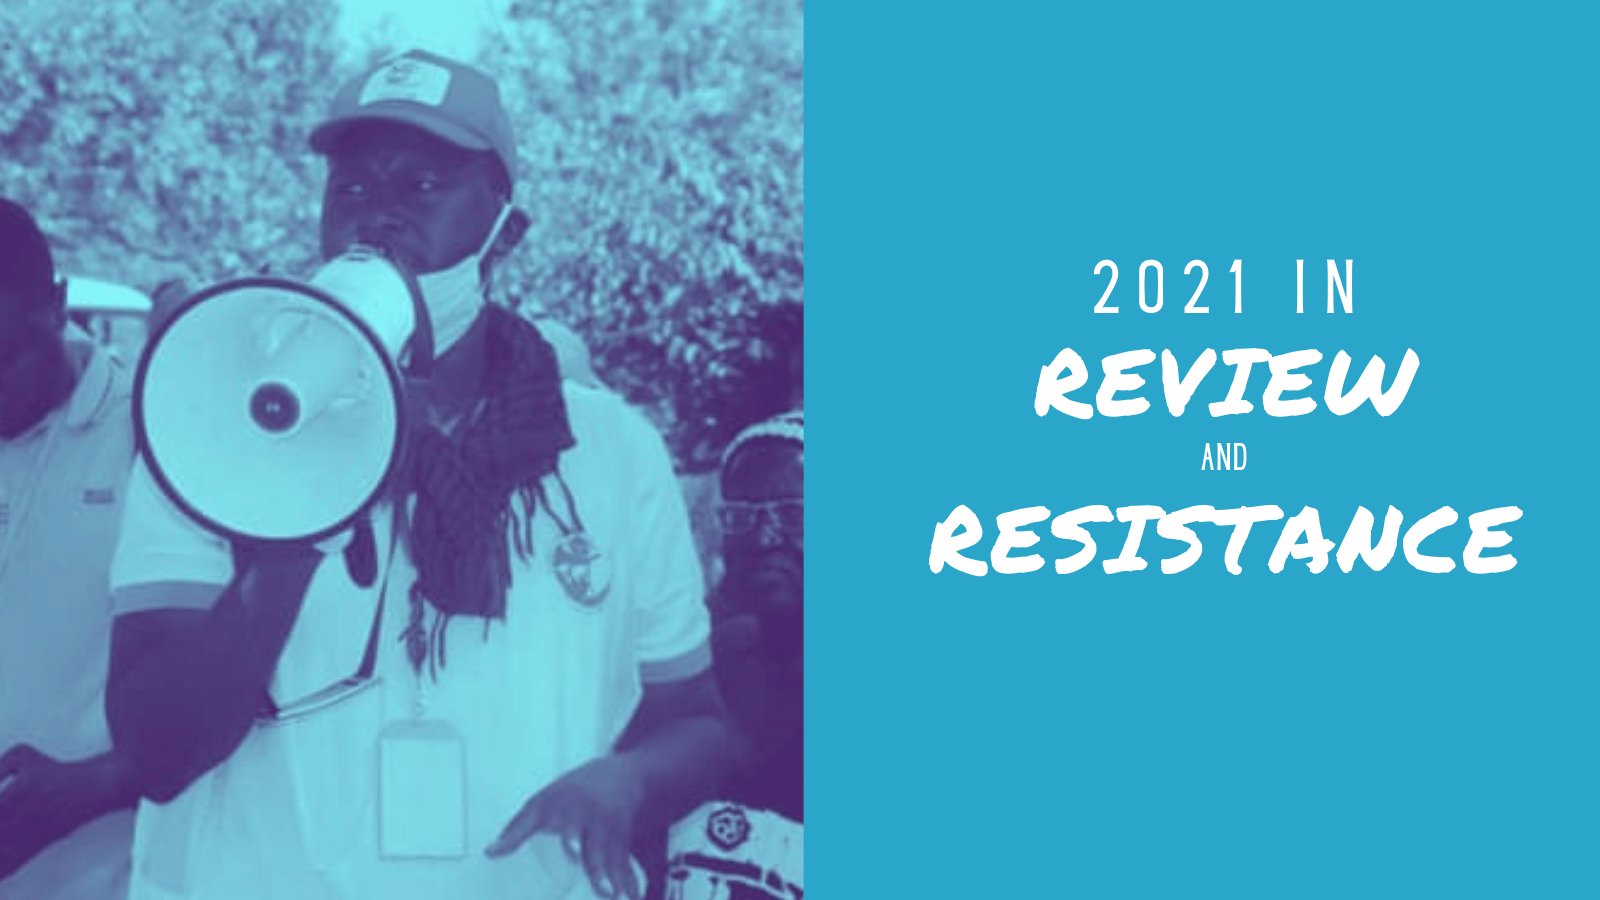 [:en]2021 in Review and Resistance[:]